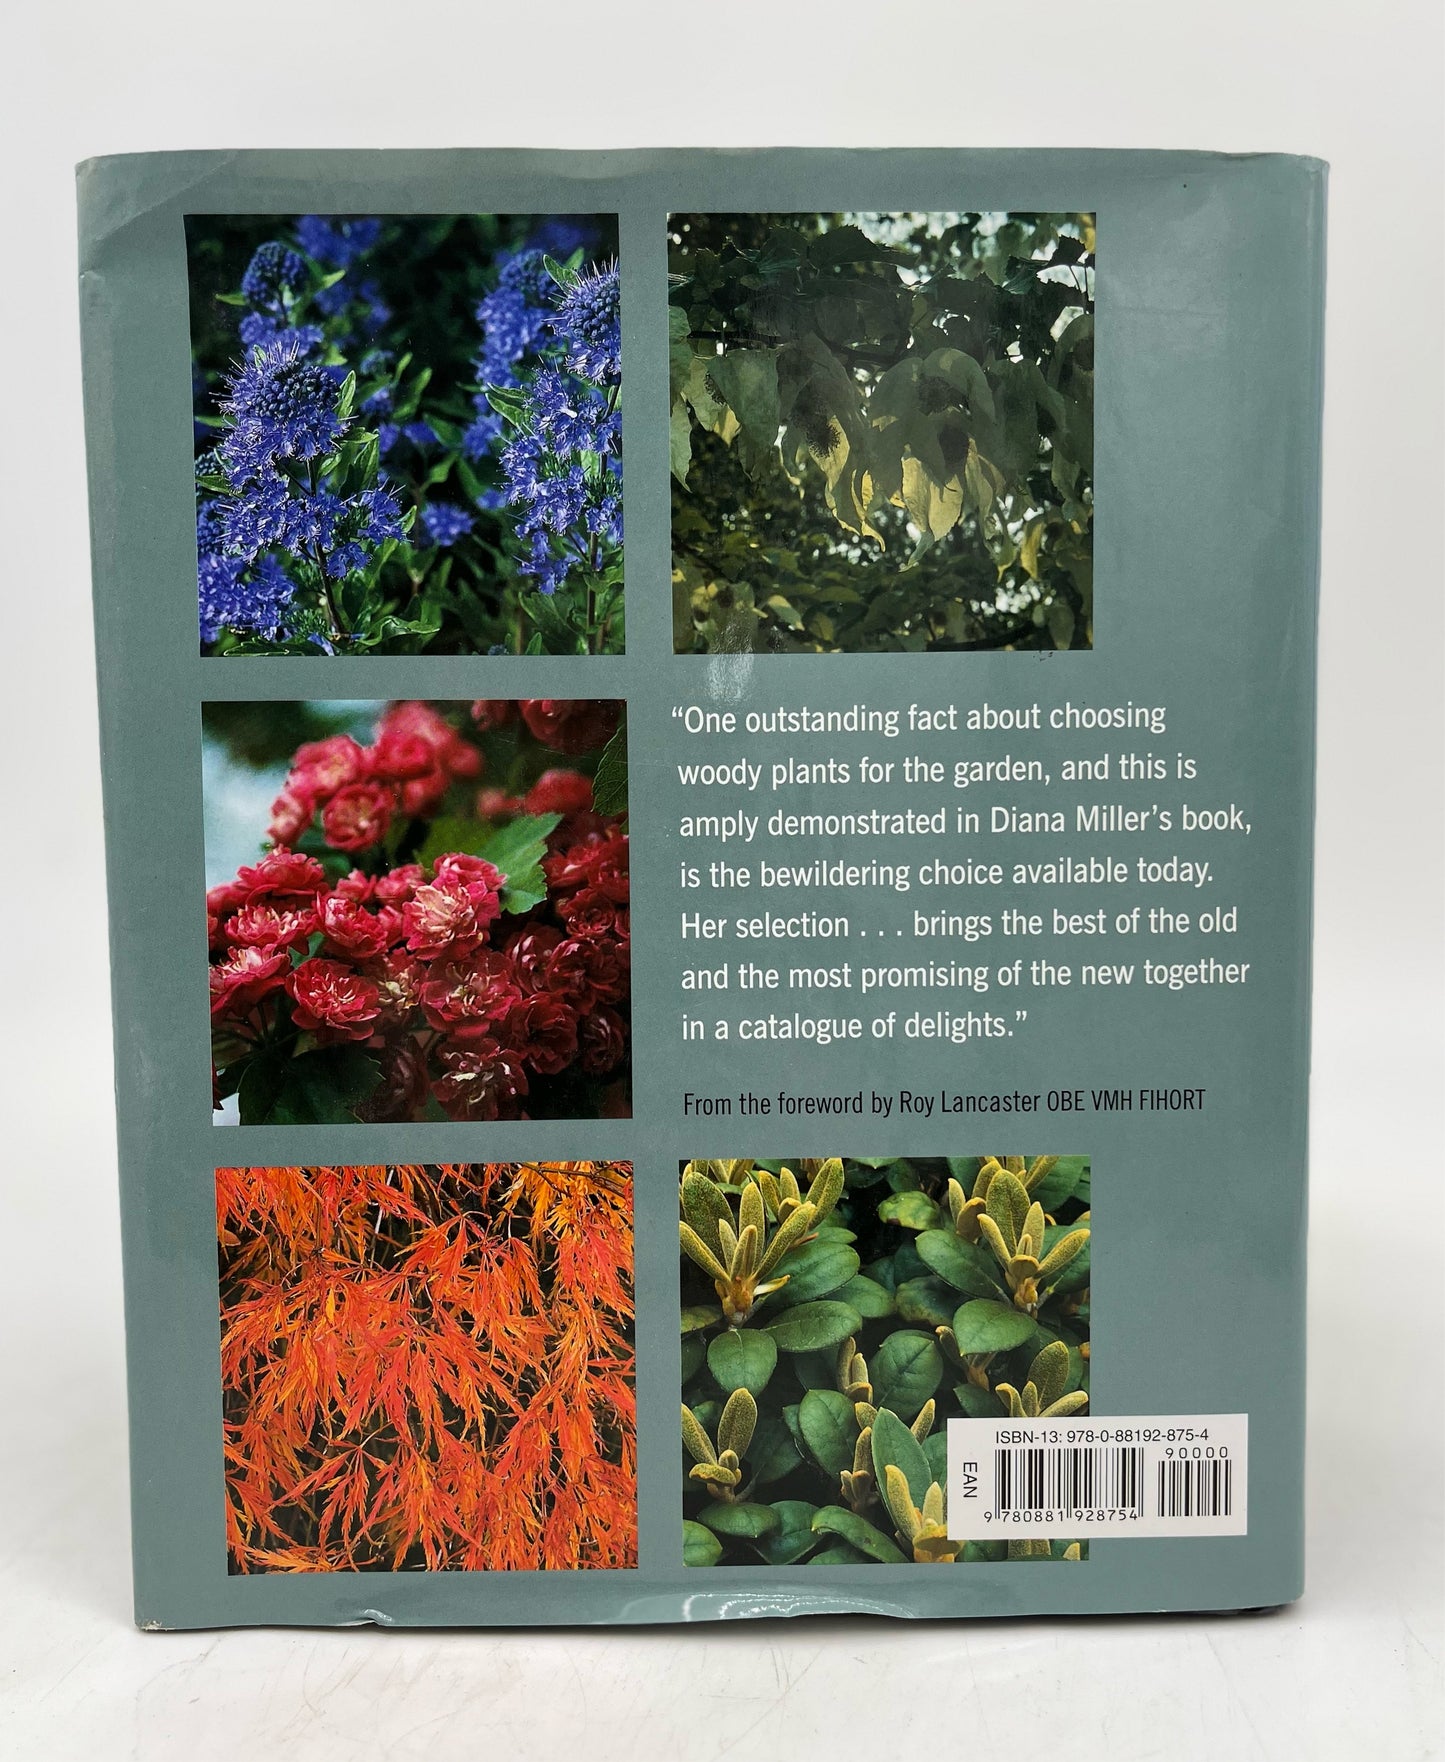 400 Trees and Shrubs for Small Spaces - Diana M. Miller